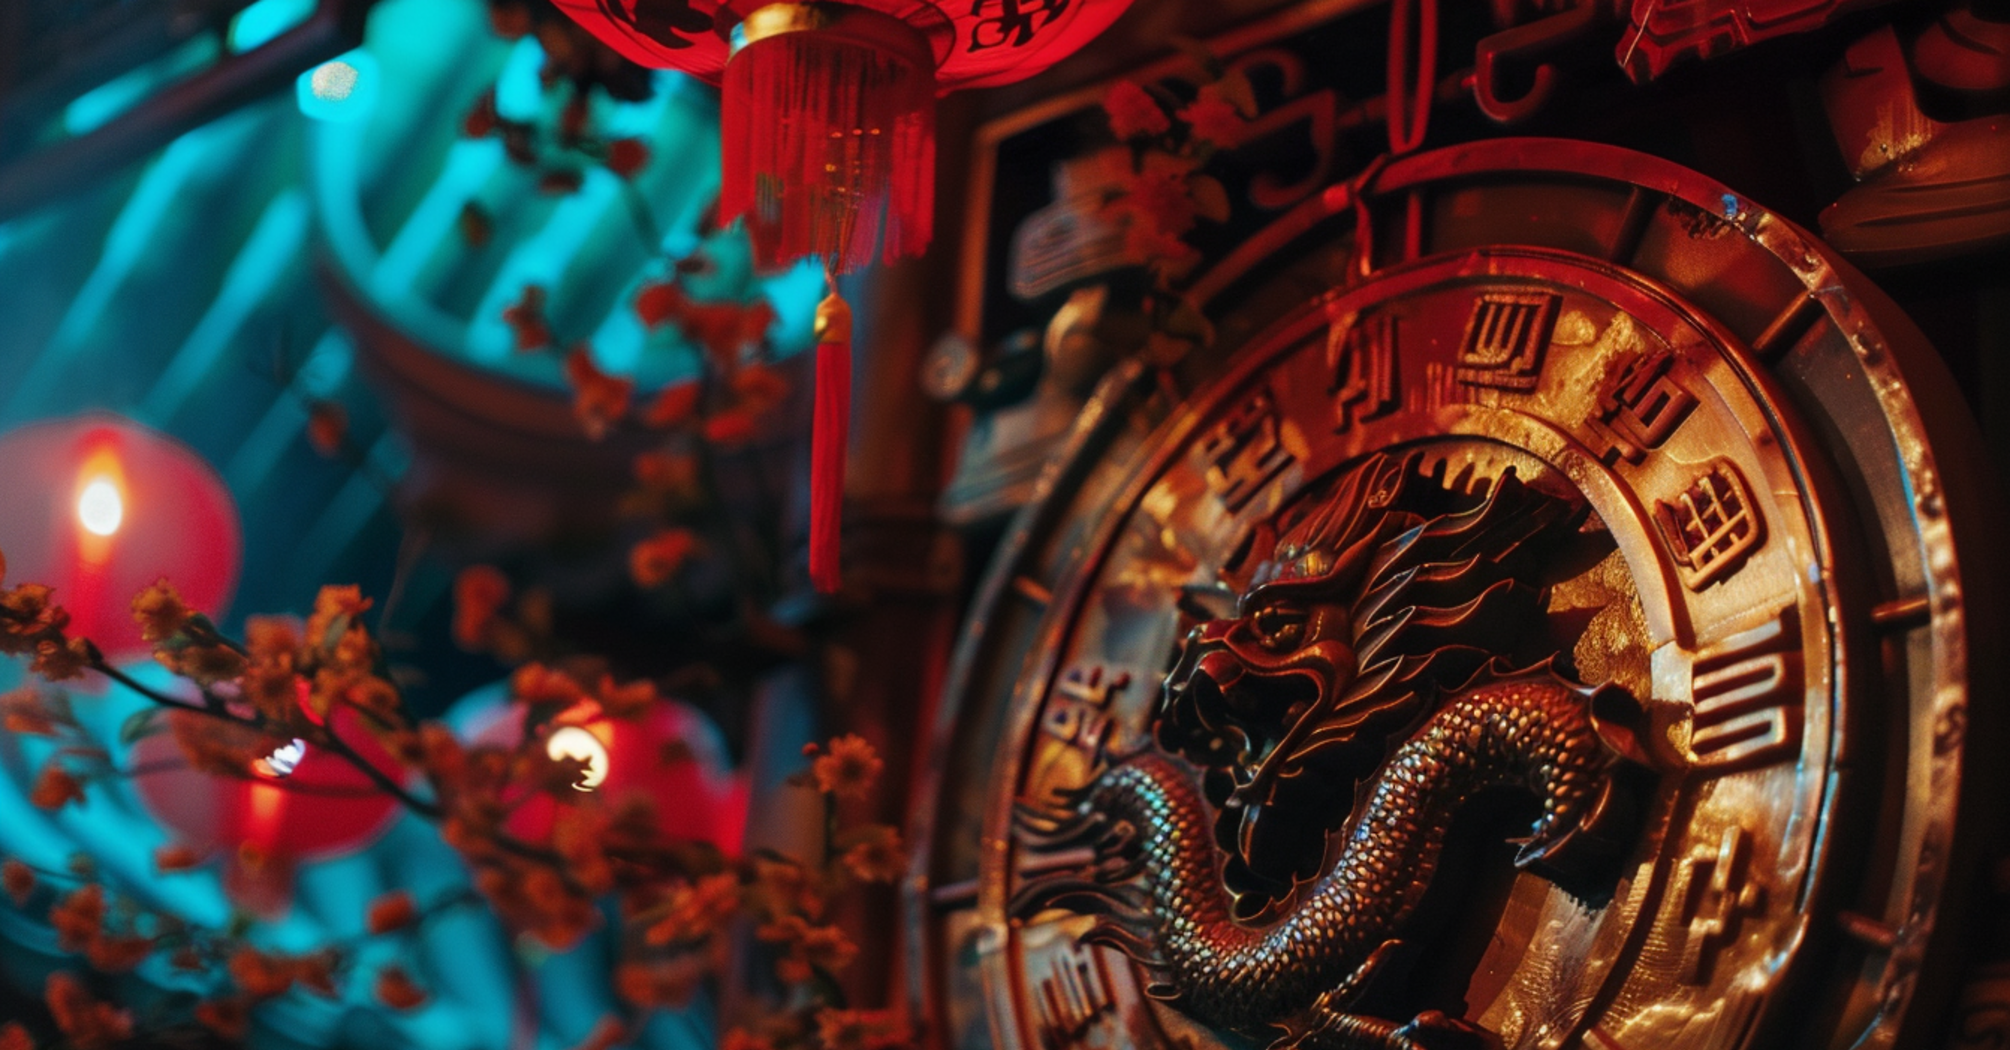 A day full of adventures and meaningful connections: Chinese horoscope for June 13